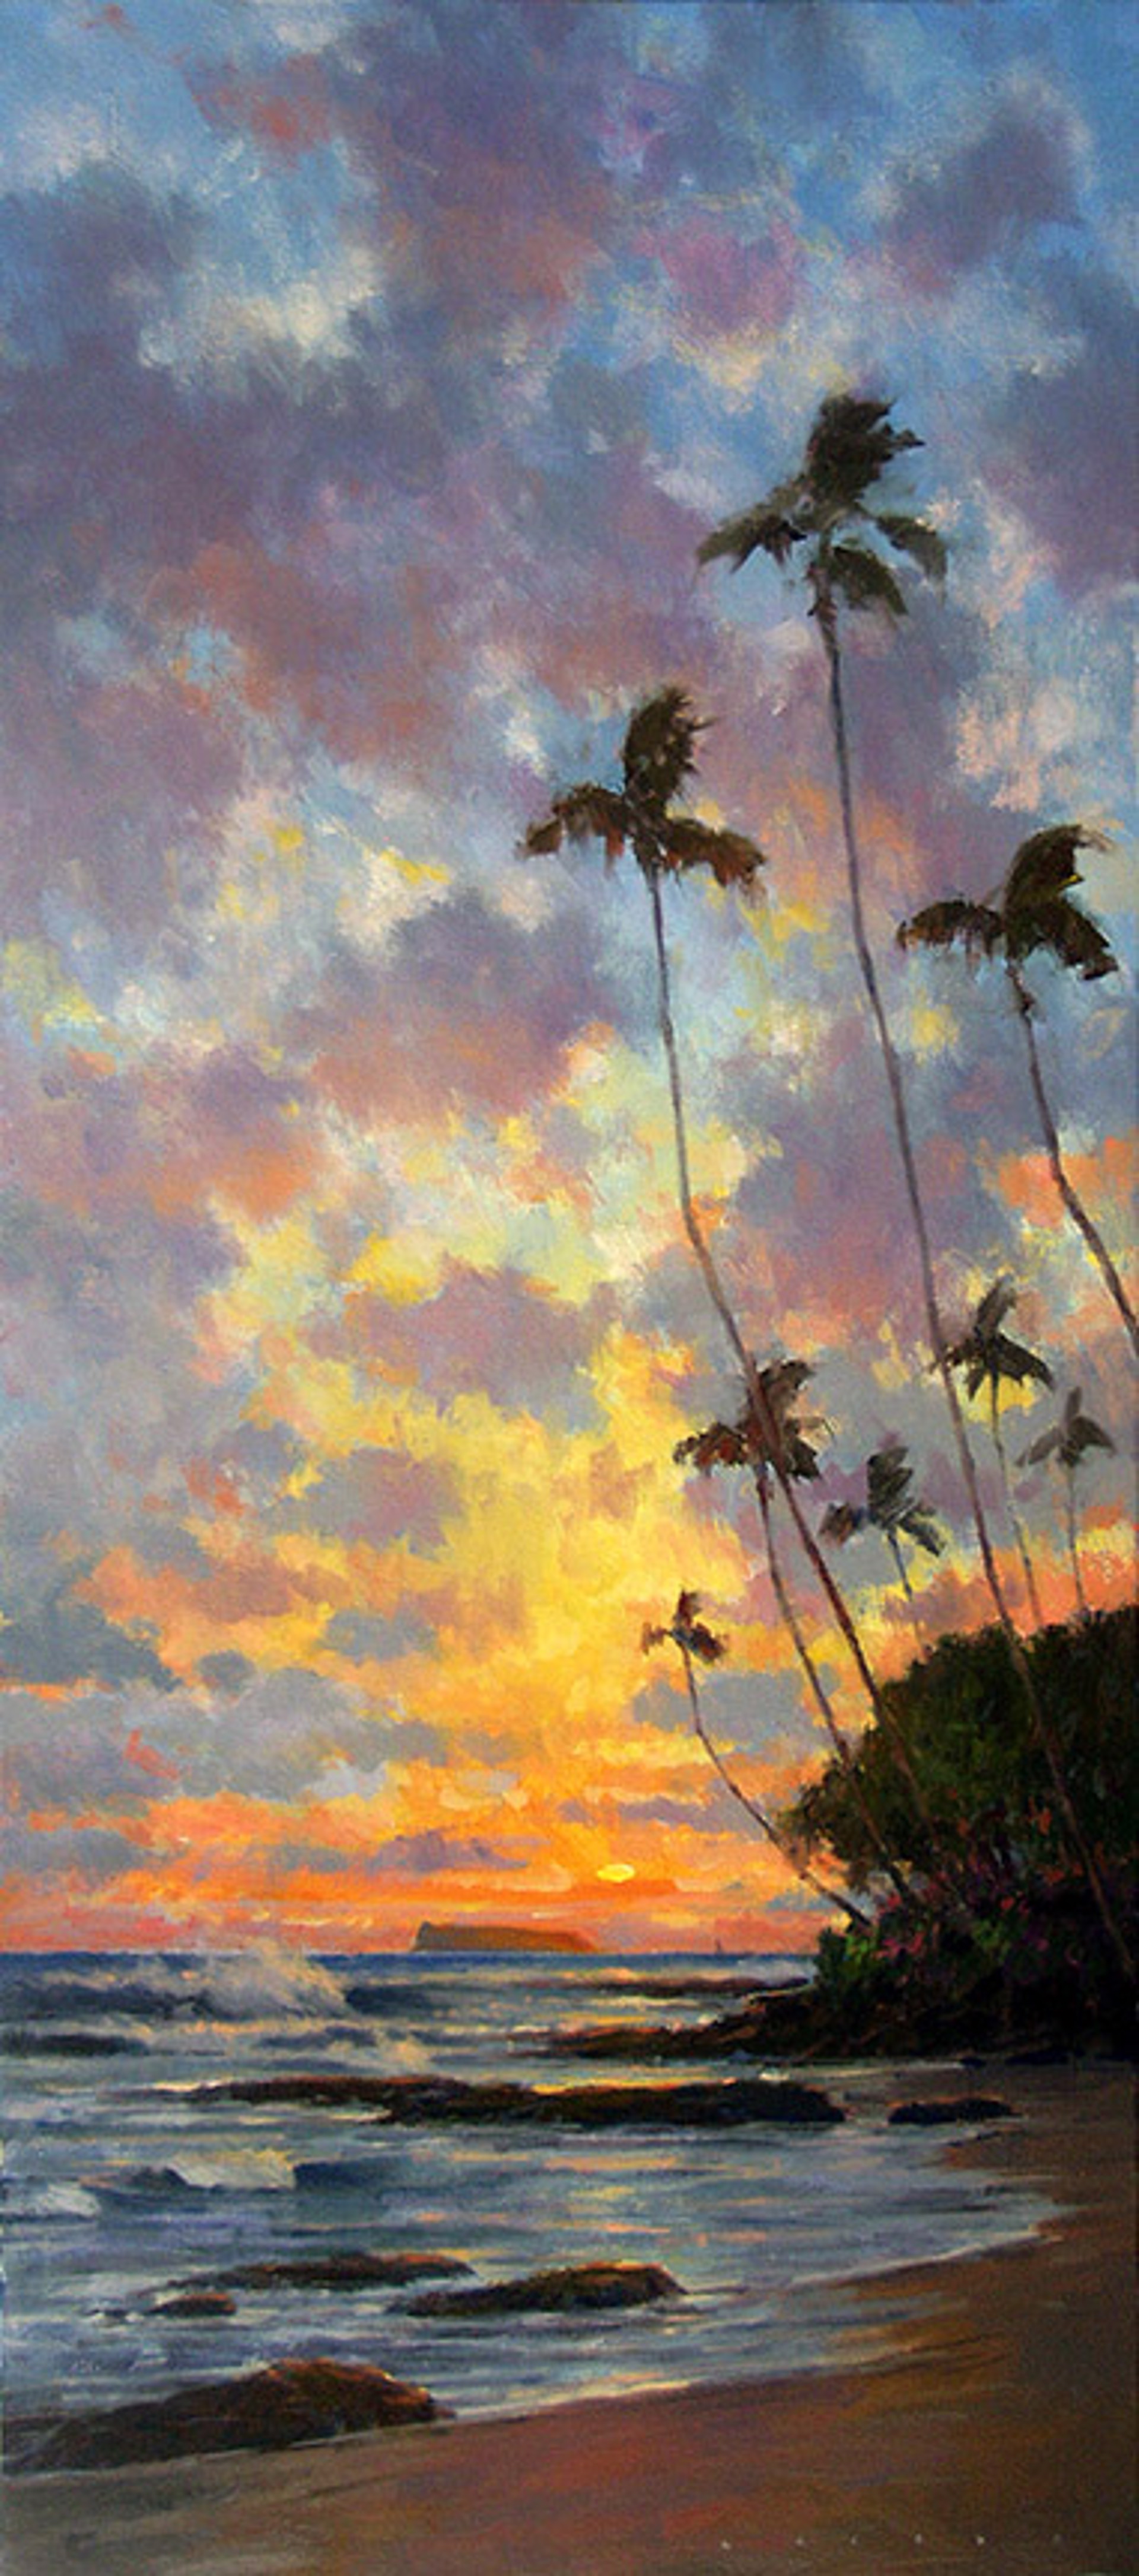 Golden Shores of Maui - SOLD by Commission Possibilities / Previously Sold ZX